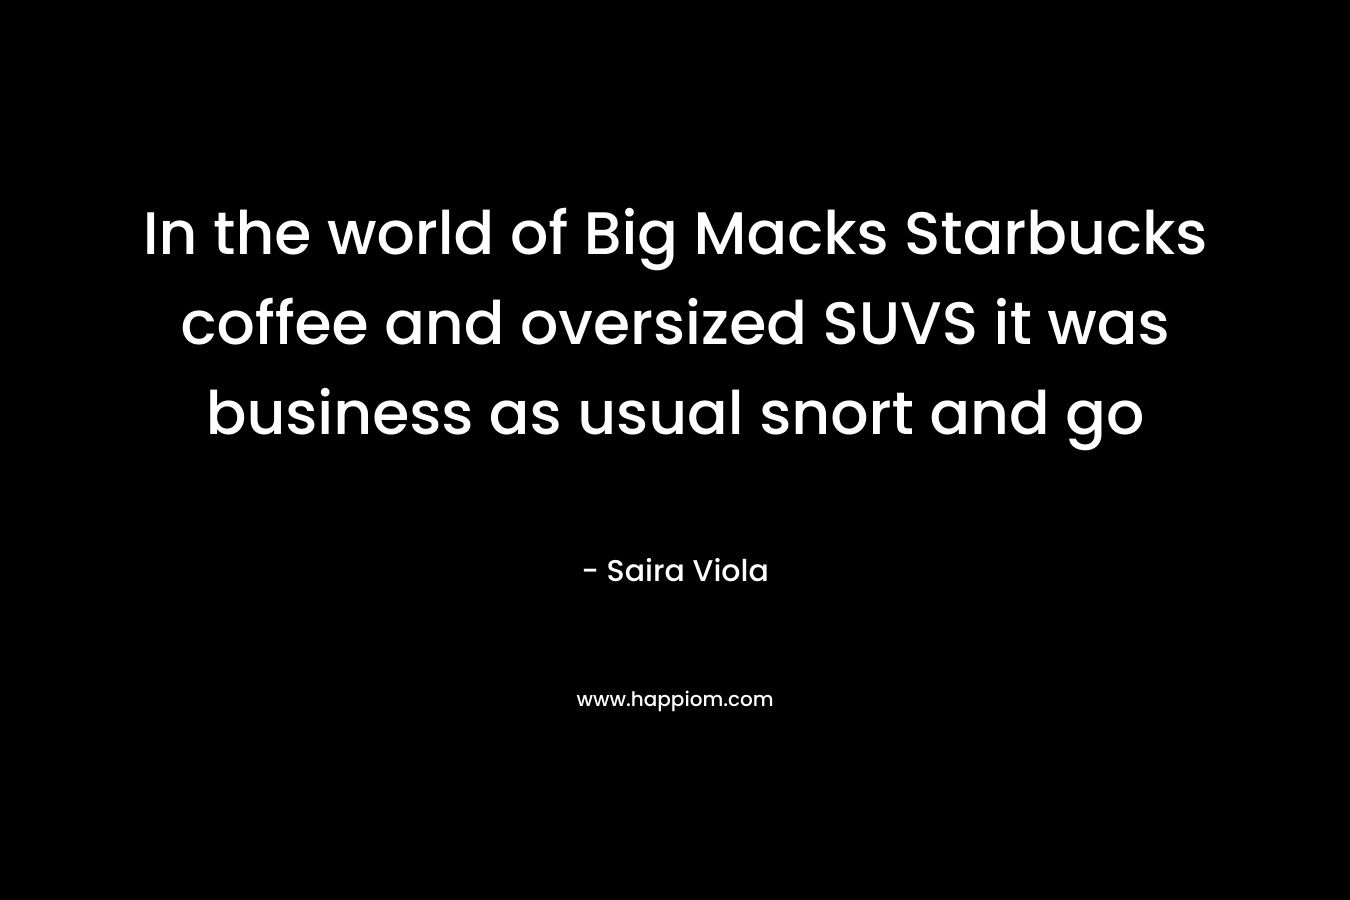 In the world of Big Macks Starbucks coffee and oversized SUVS it was business as usual snort and go – Saira Viola